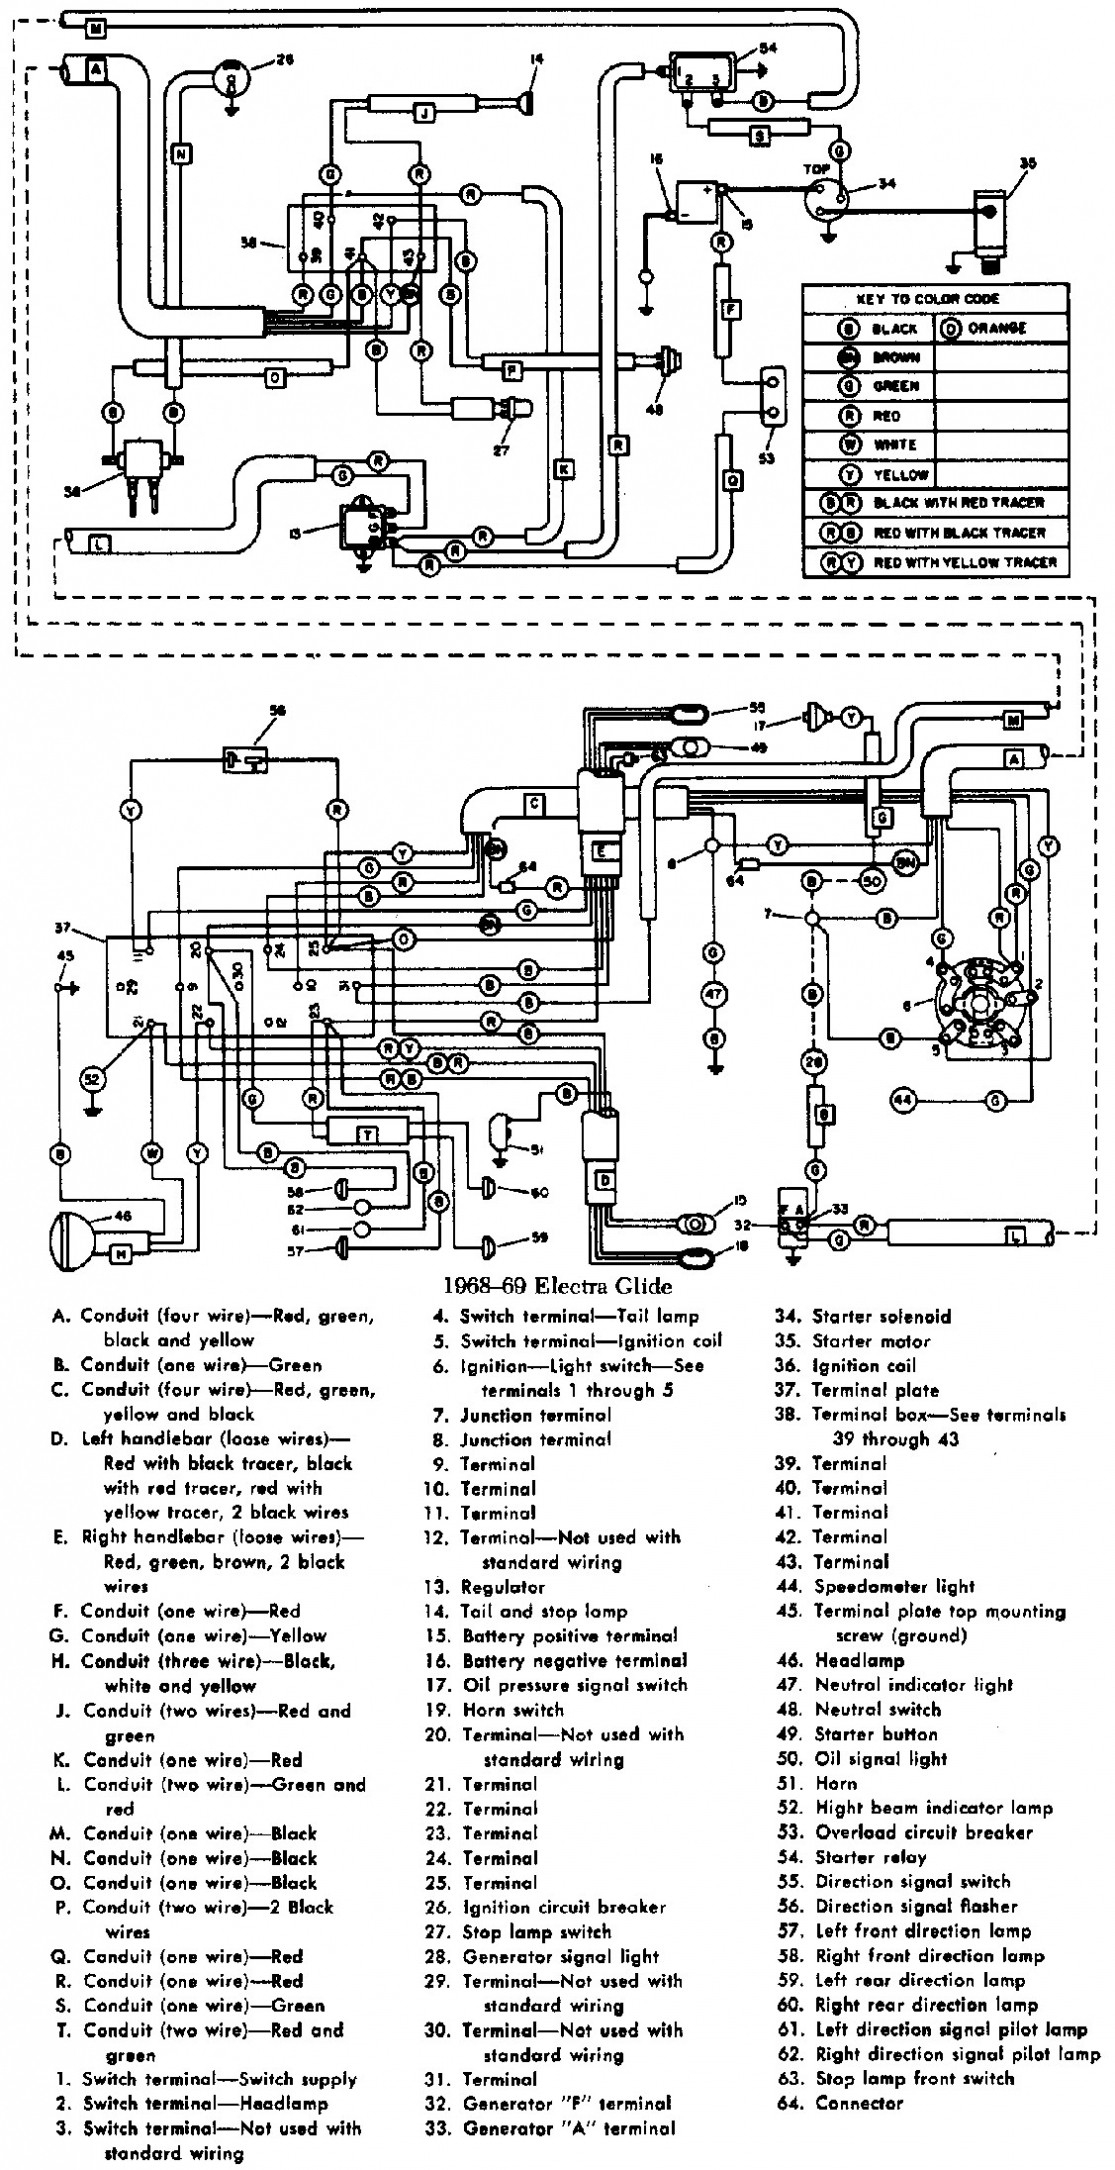 Ignition Switch Wiring Diagram Chevy Inspirational Ignition Switch - 5 Prong Ignition Switch Wiring Diagram